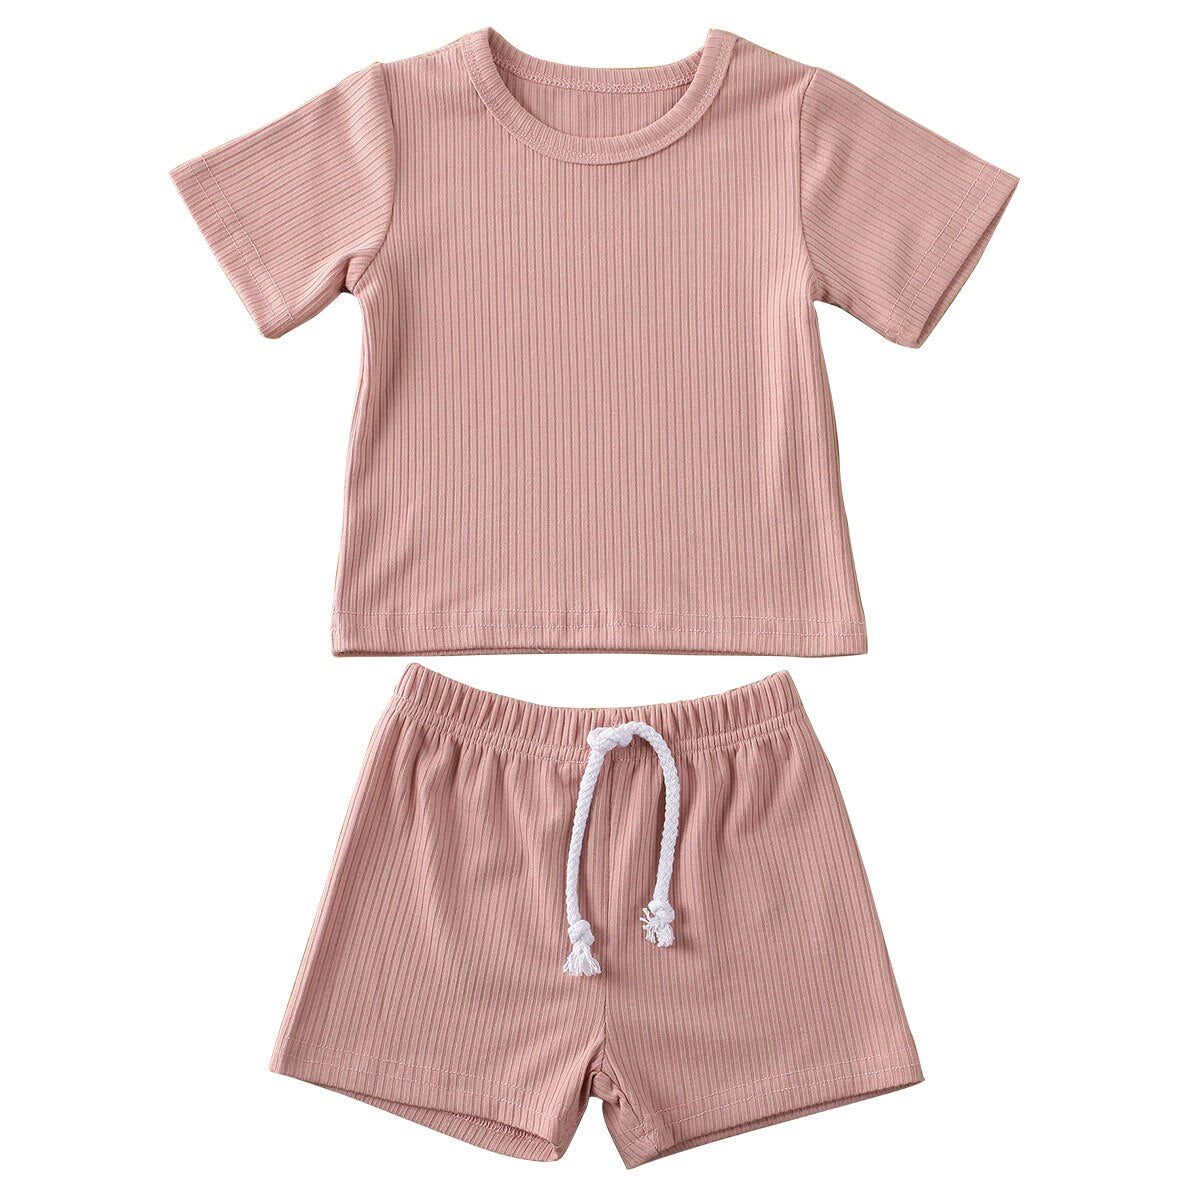 Harlow Summer Outfit Set